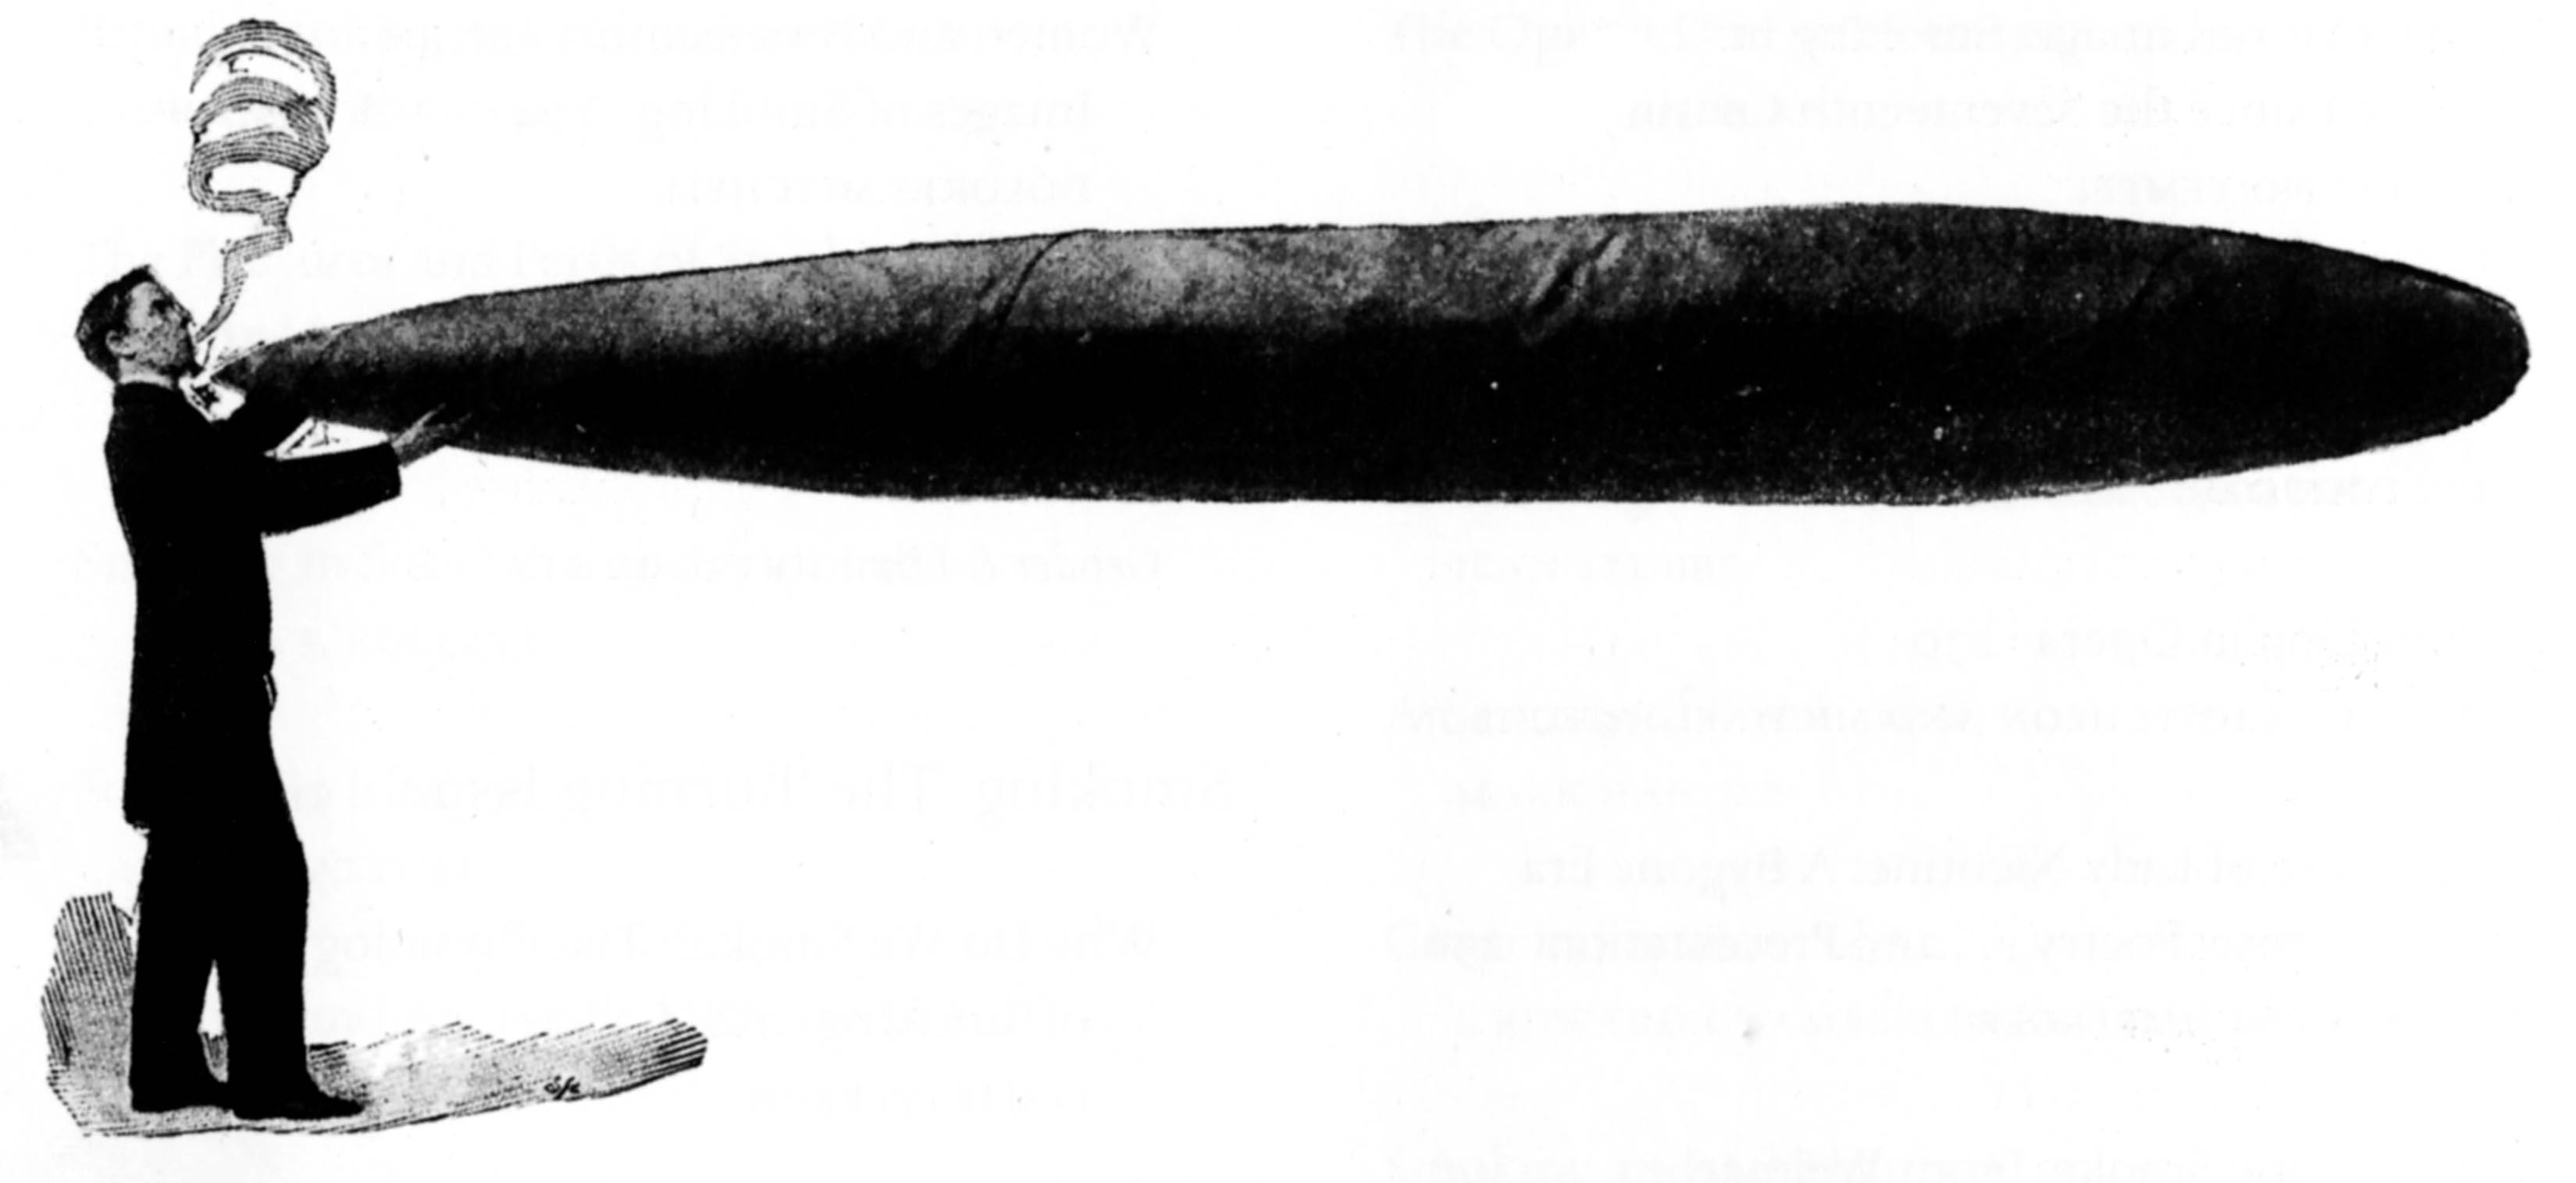 A drawing of the Colossal Cigar which shows the amount of tobacco inhaled by a smoker over fifty years.